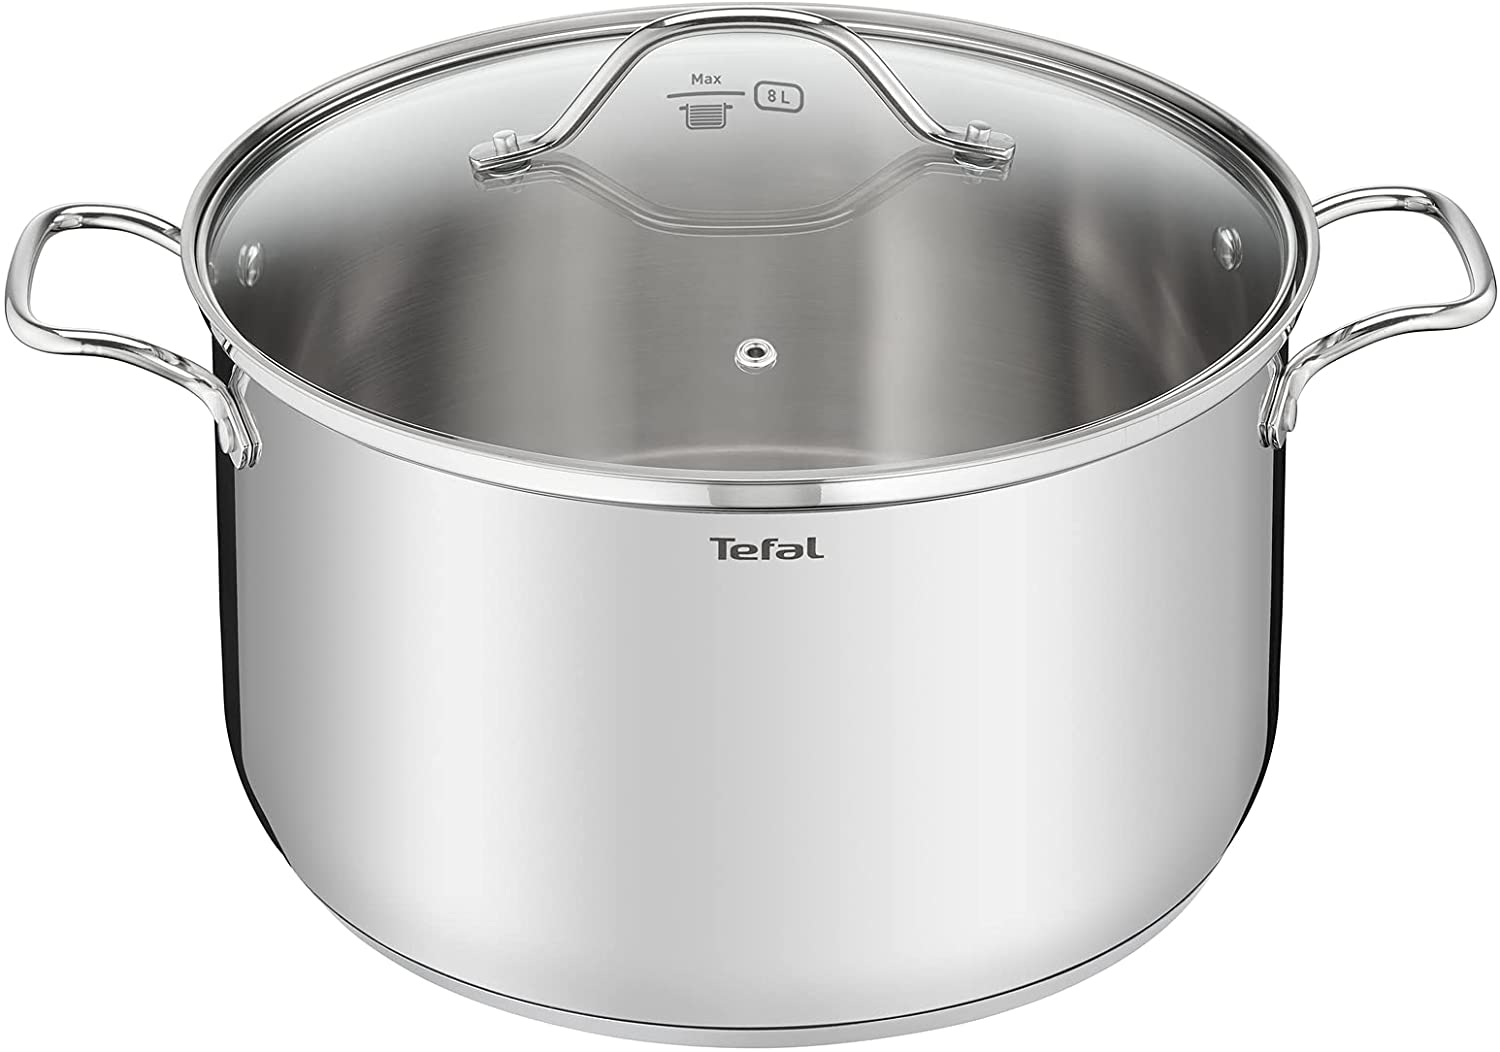 Tefal Intuition XL B9086414 Saucepan Stainless Steel 28 cm (9.8 L) with Glass Lid Suitable for All Hobs including Induction